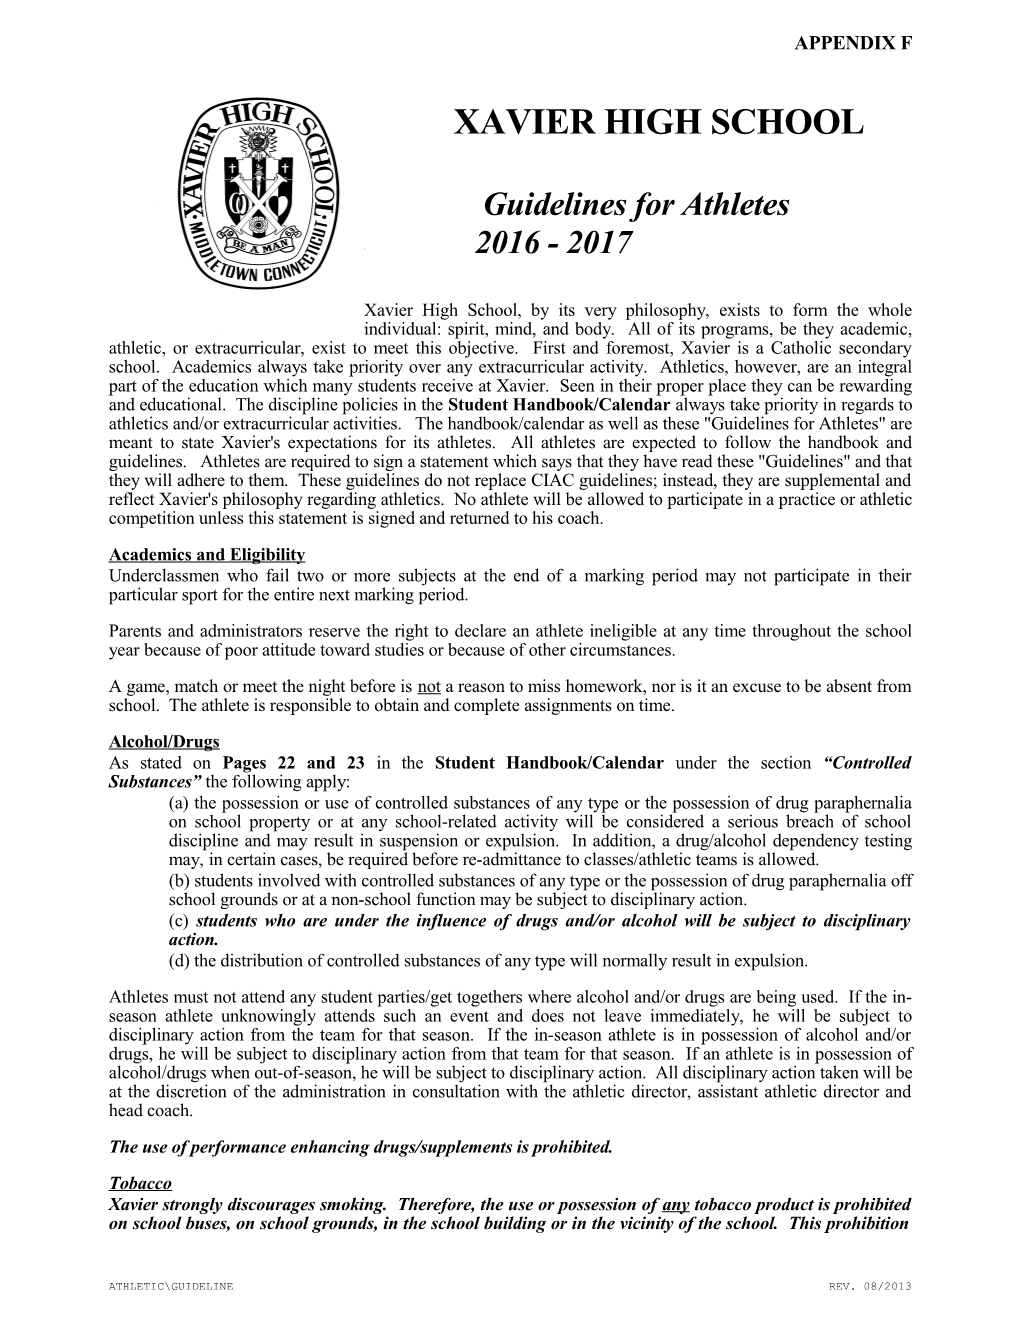 Athletic Guidelines Txt